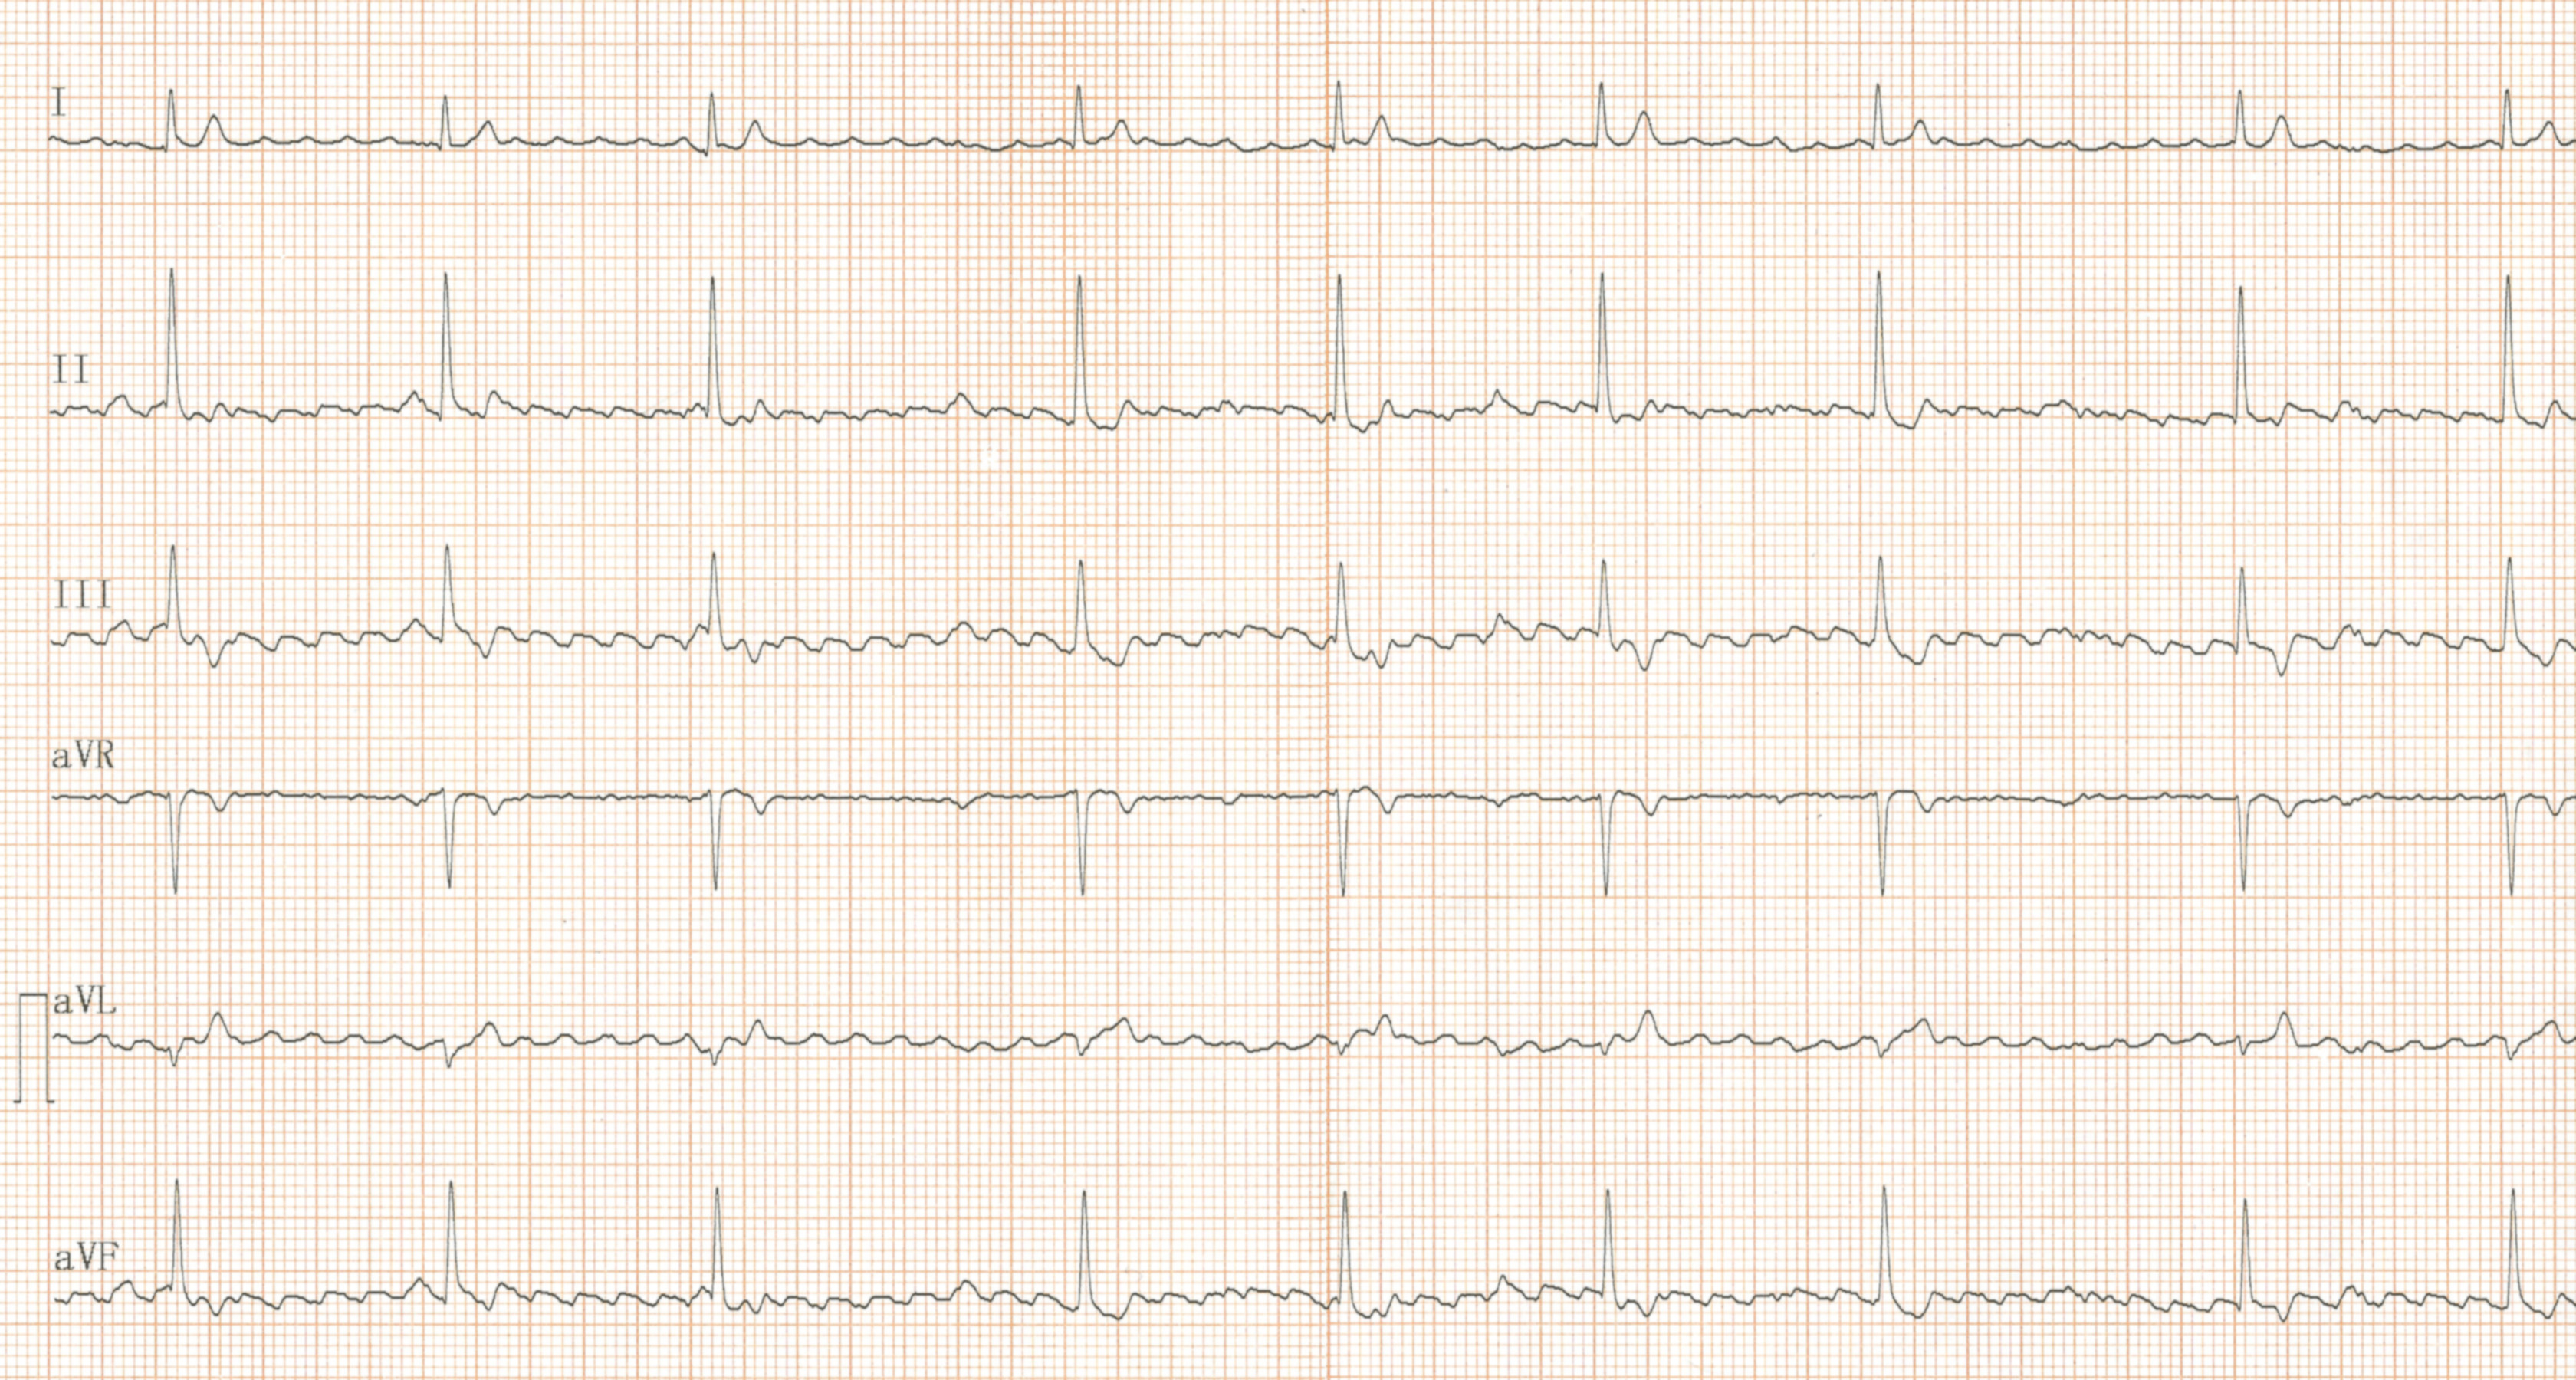 Flutter atrial avec conduction auriculo-ventriculaire variable.